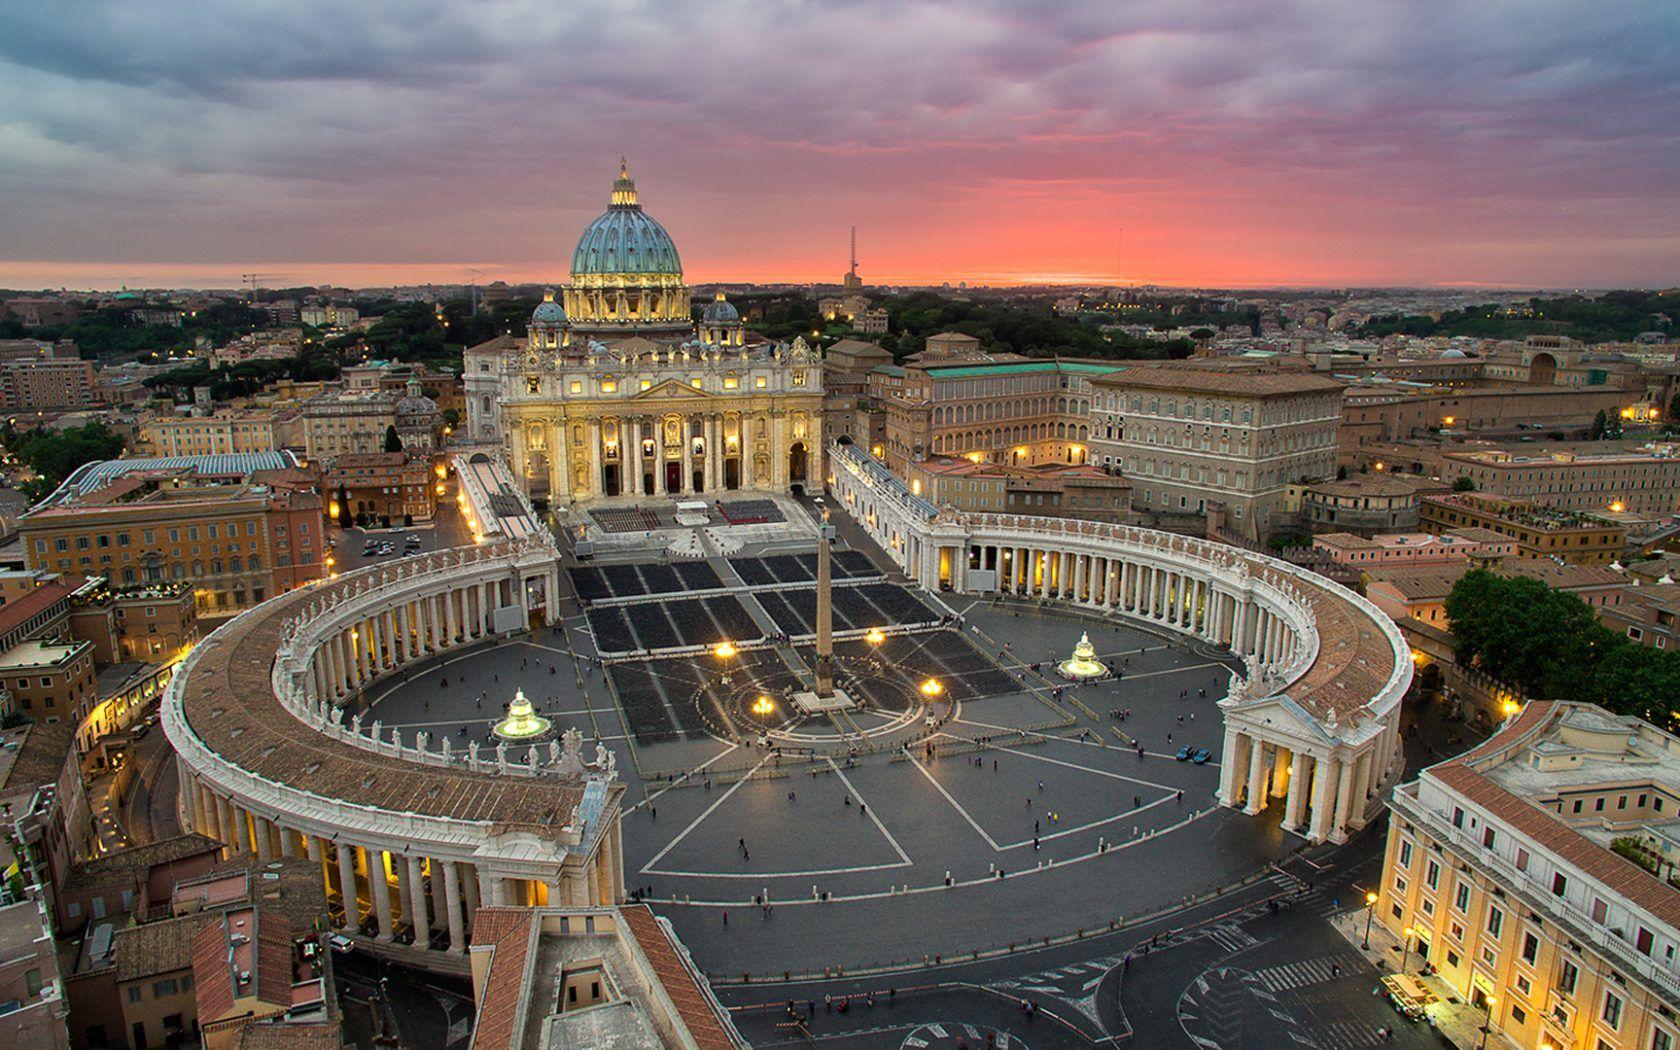 Vatican City, A City State Surrounded By Rome, Italy, Is